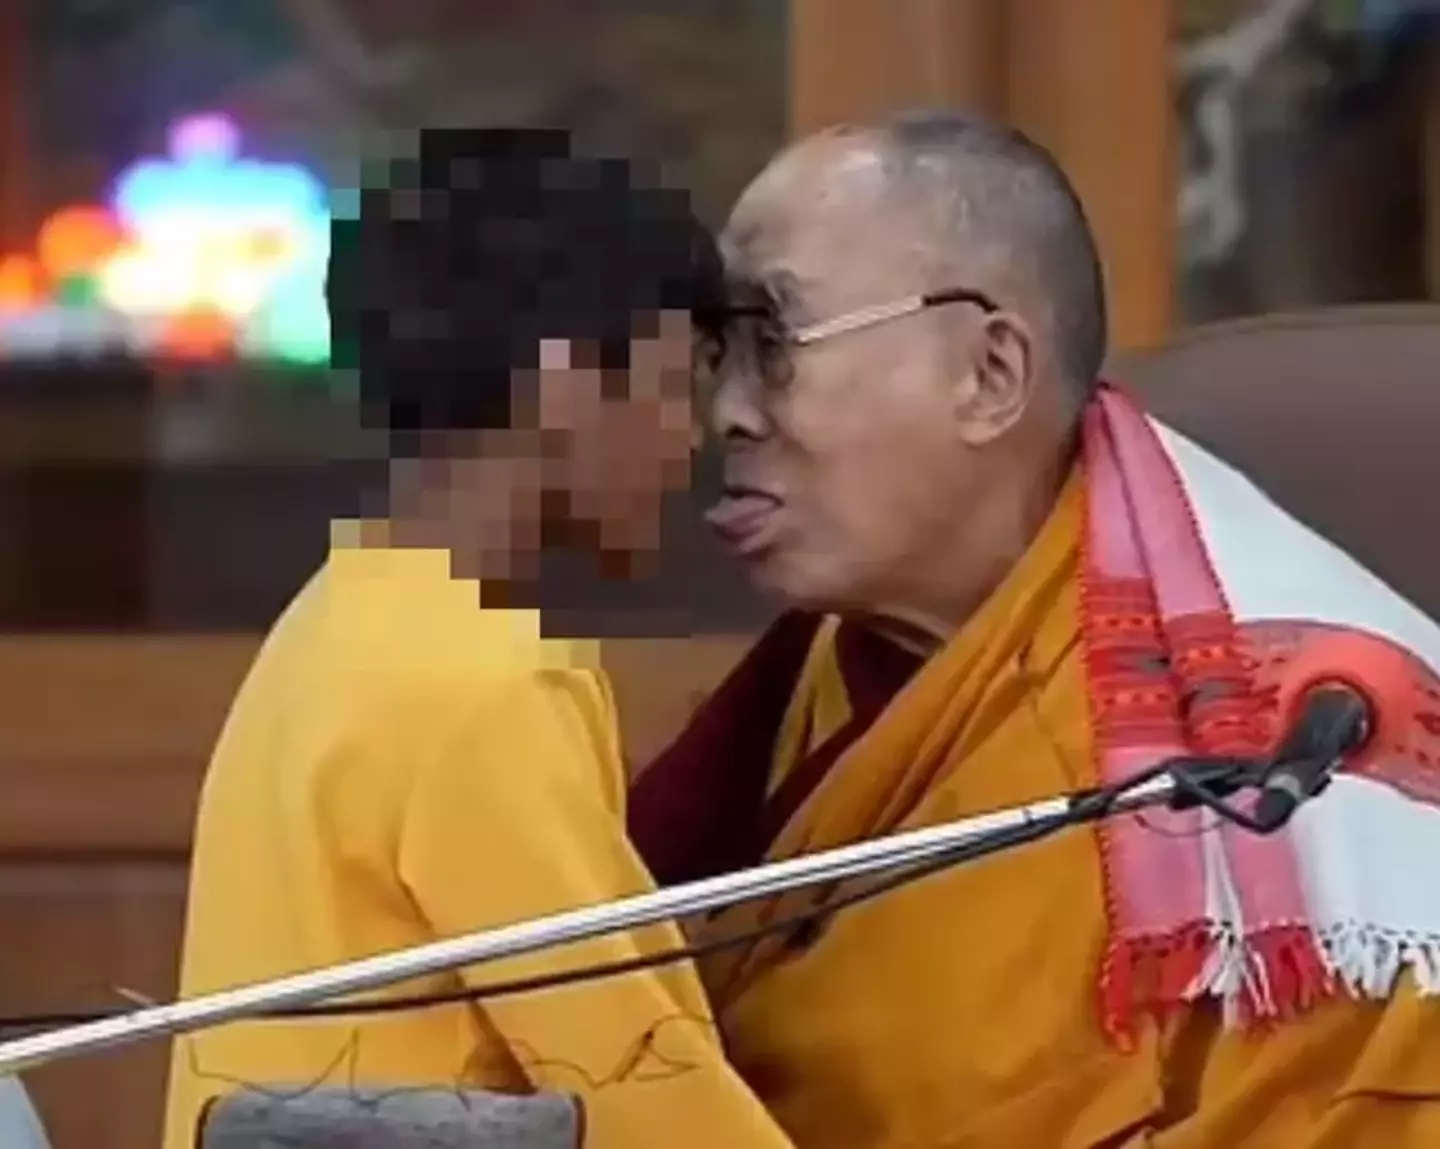 At one point, the Dalai Lama told the boy to 'suck' his tongue.